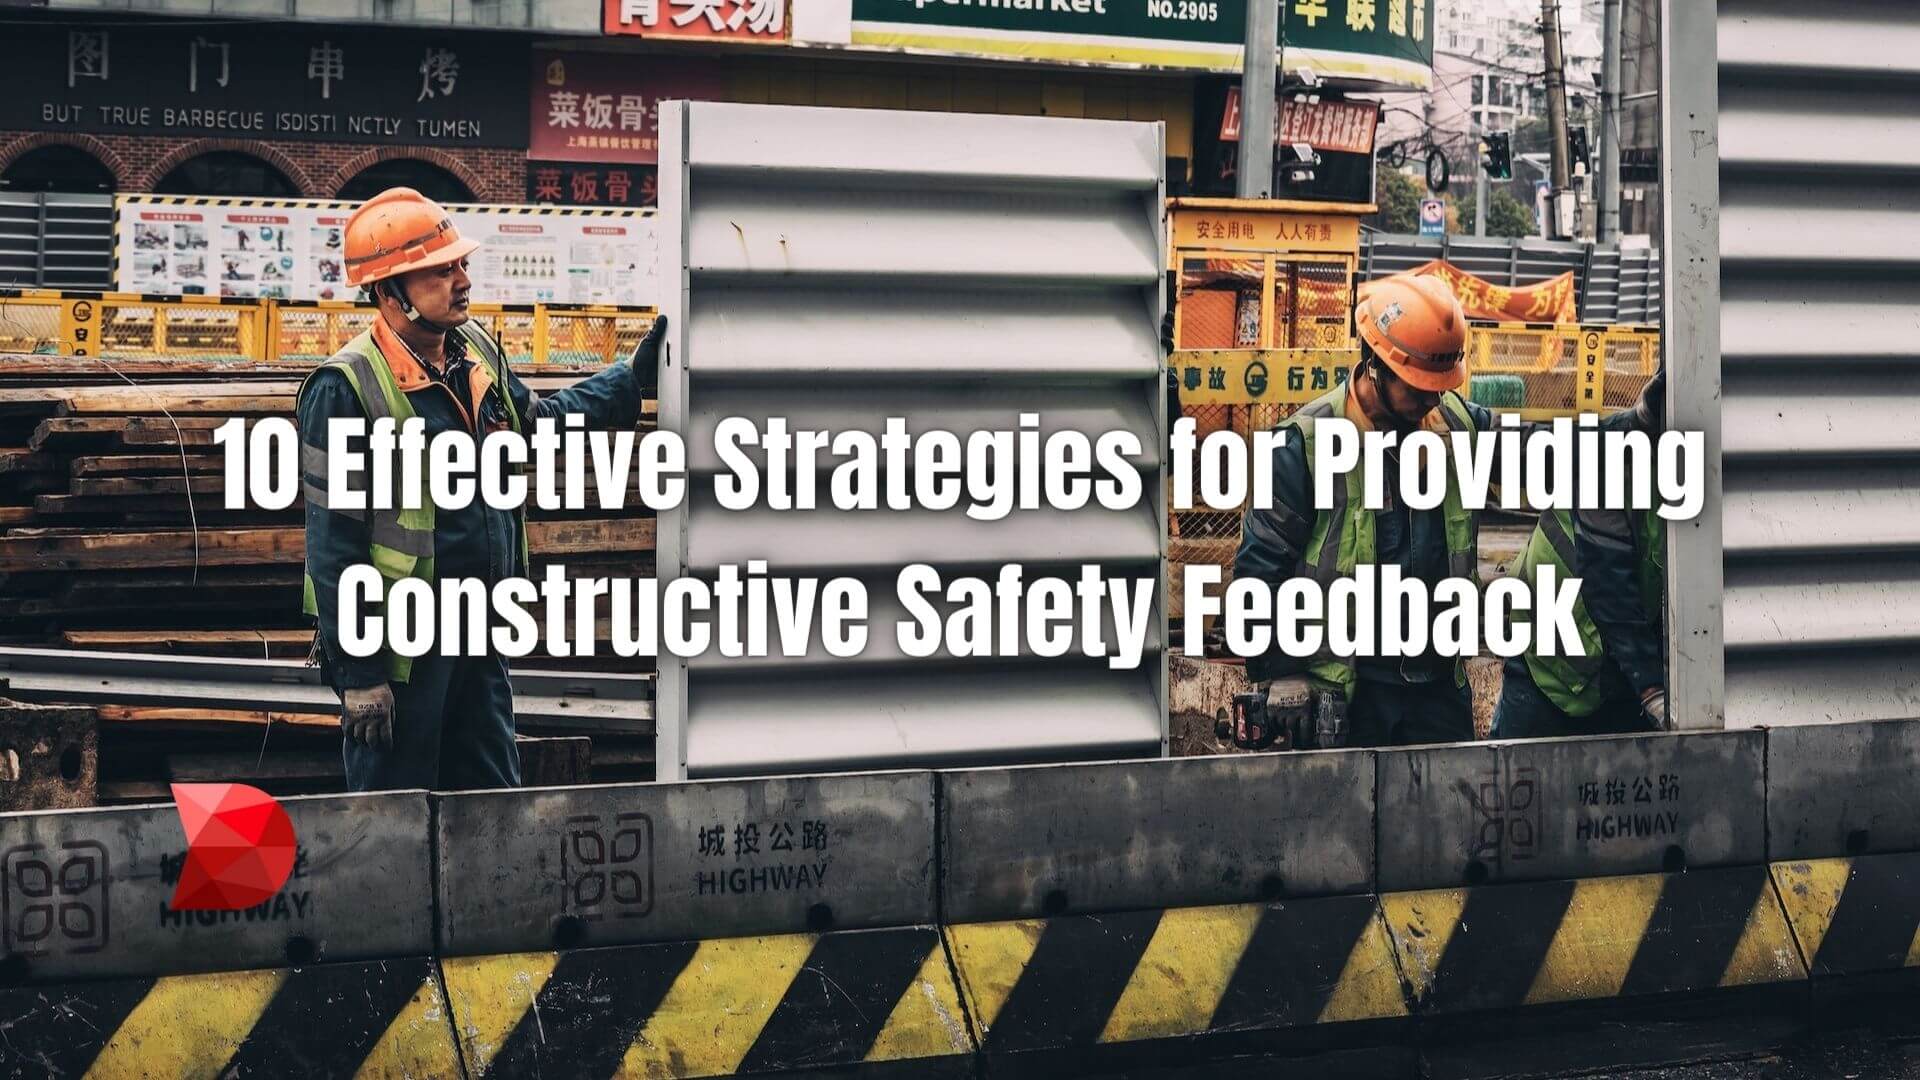 Encouraging a safer work environment involves more than just pointing out what's wrong. Here are 10 ways to give better safety feedback.